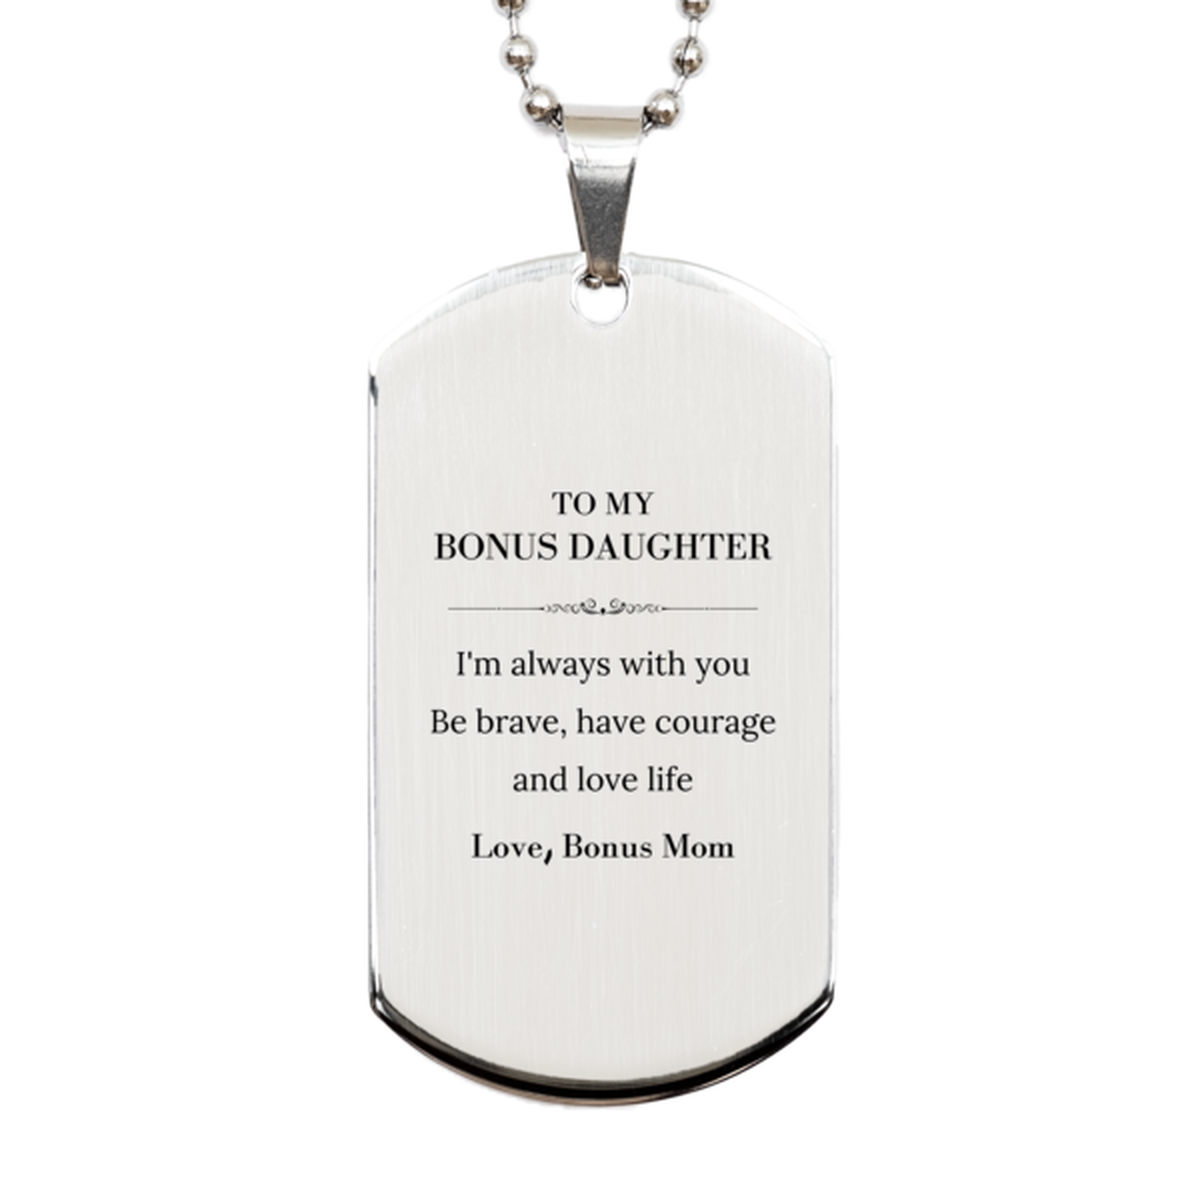 To My Bonus Daughter Gifts from Bonus Mom, Unique Silver Dog Tag Inspirational Christmas Birthday Graduation Gifts for Bonus Daughter I'm always with you. Be brave, have courage and love life. Love, Bonus Mom